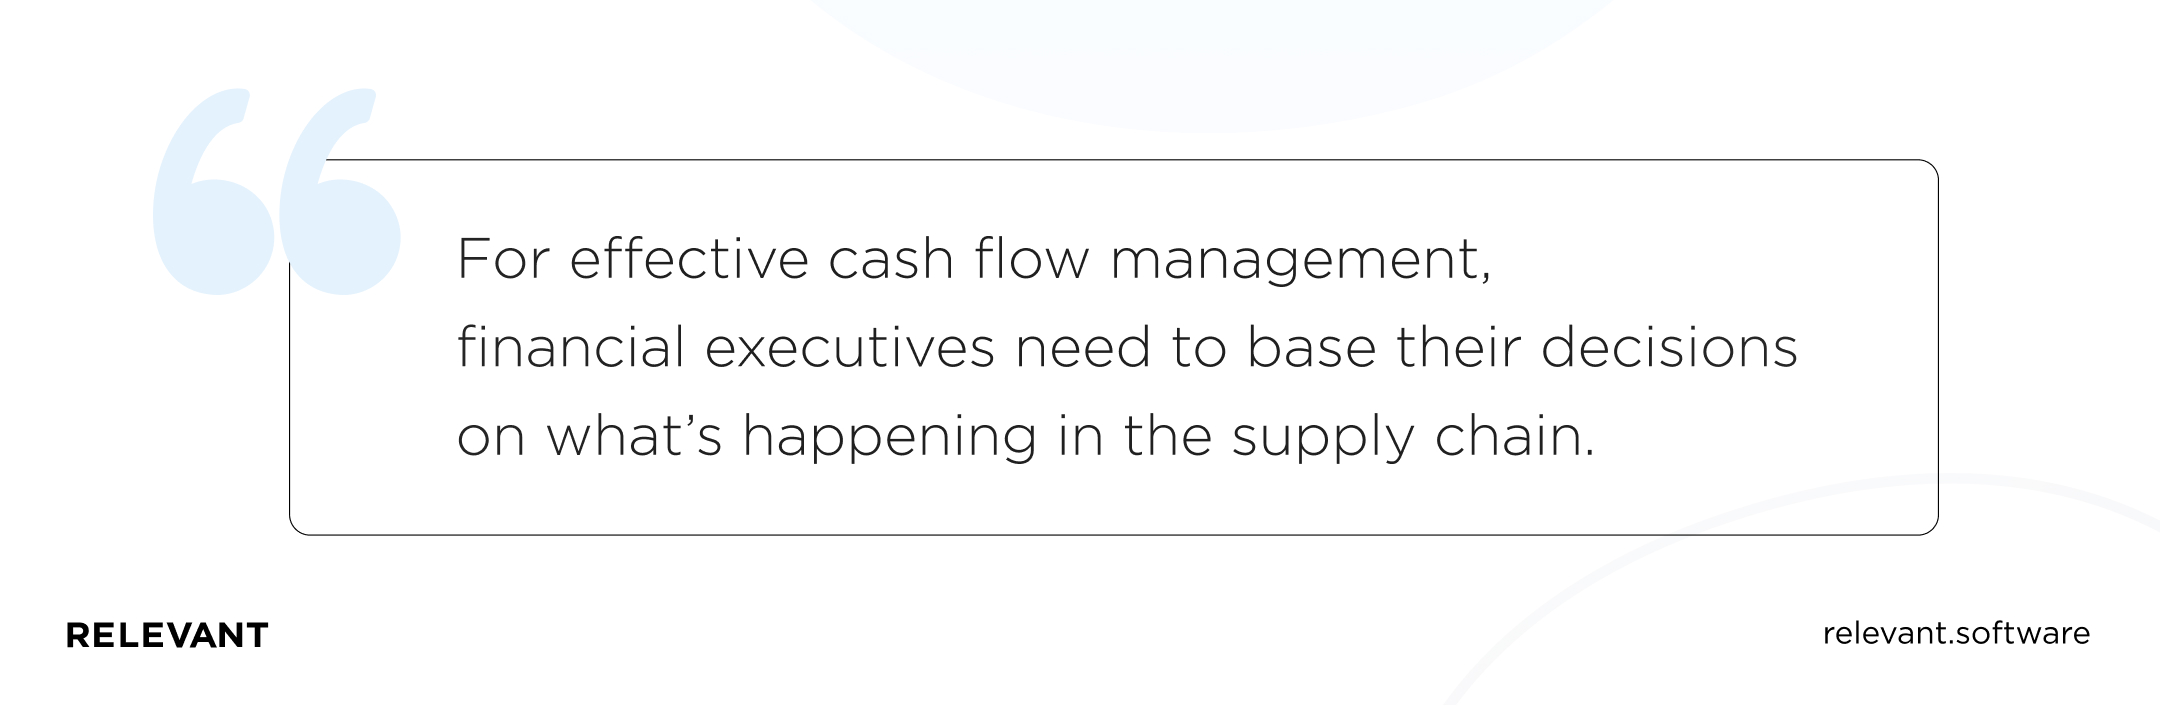 For effective cash flow management, financial executives need to base their decisions on what’s happening in the supply chain.